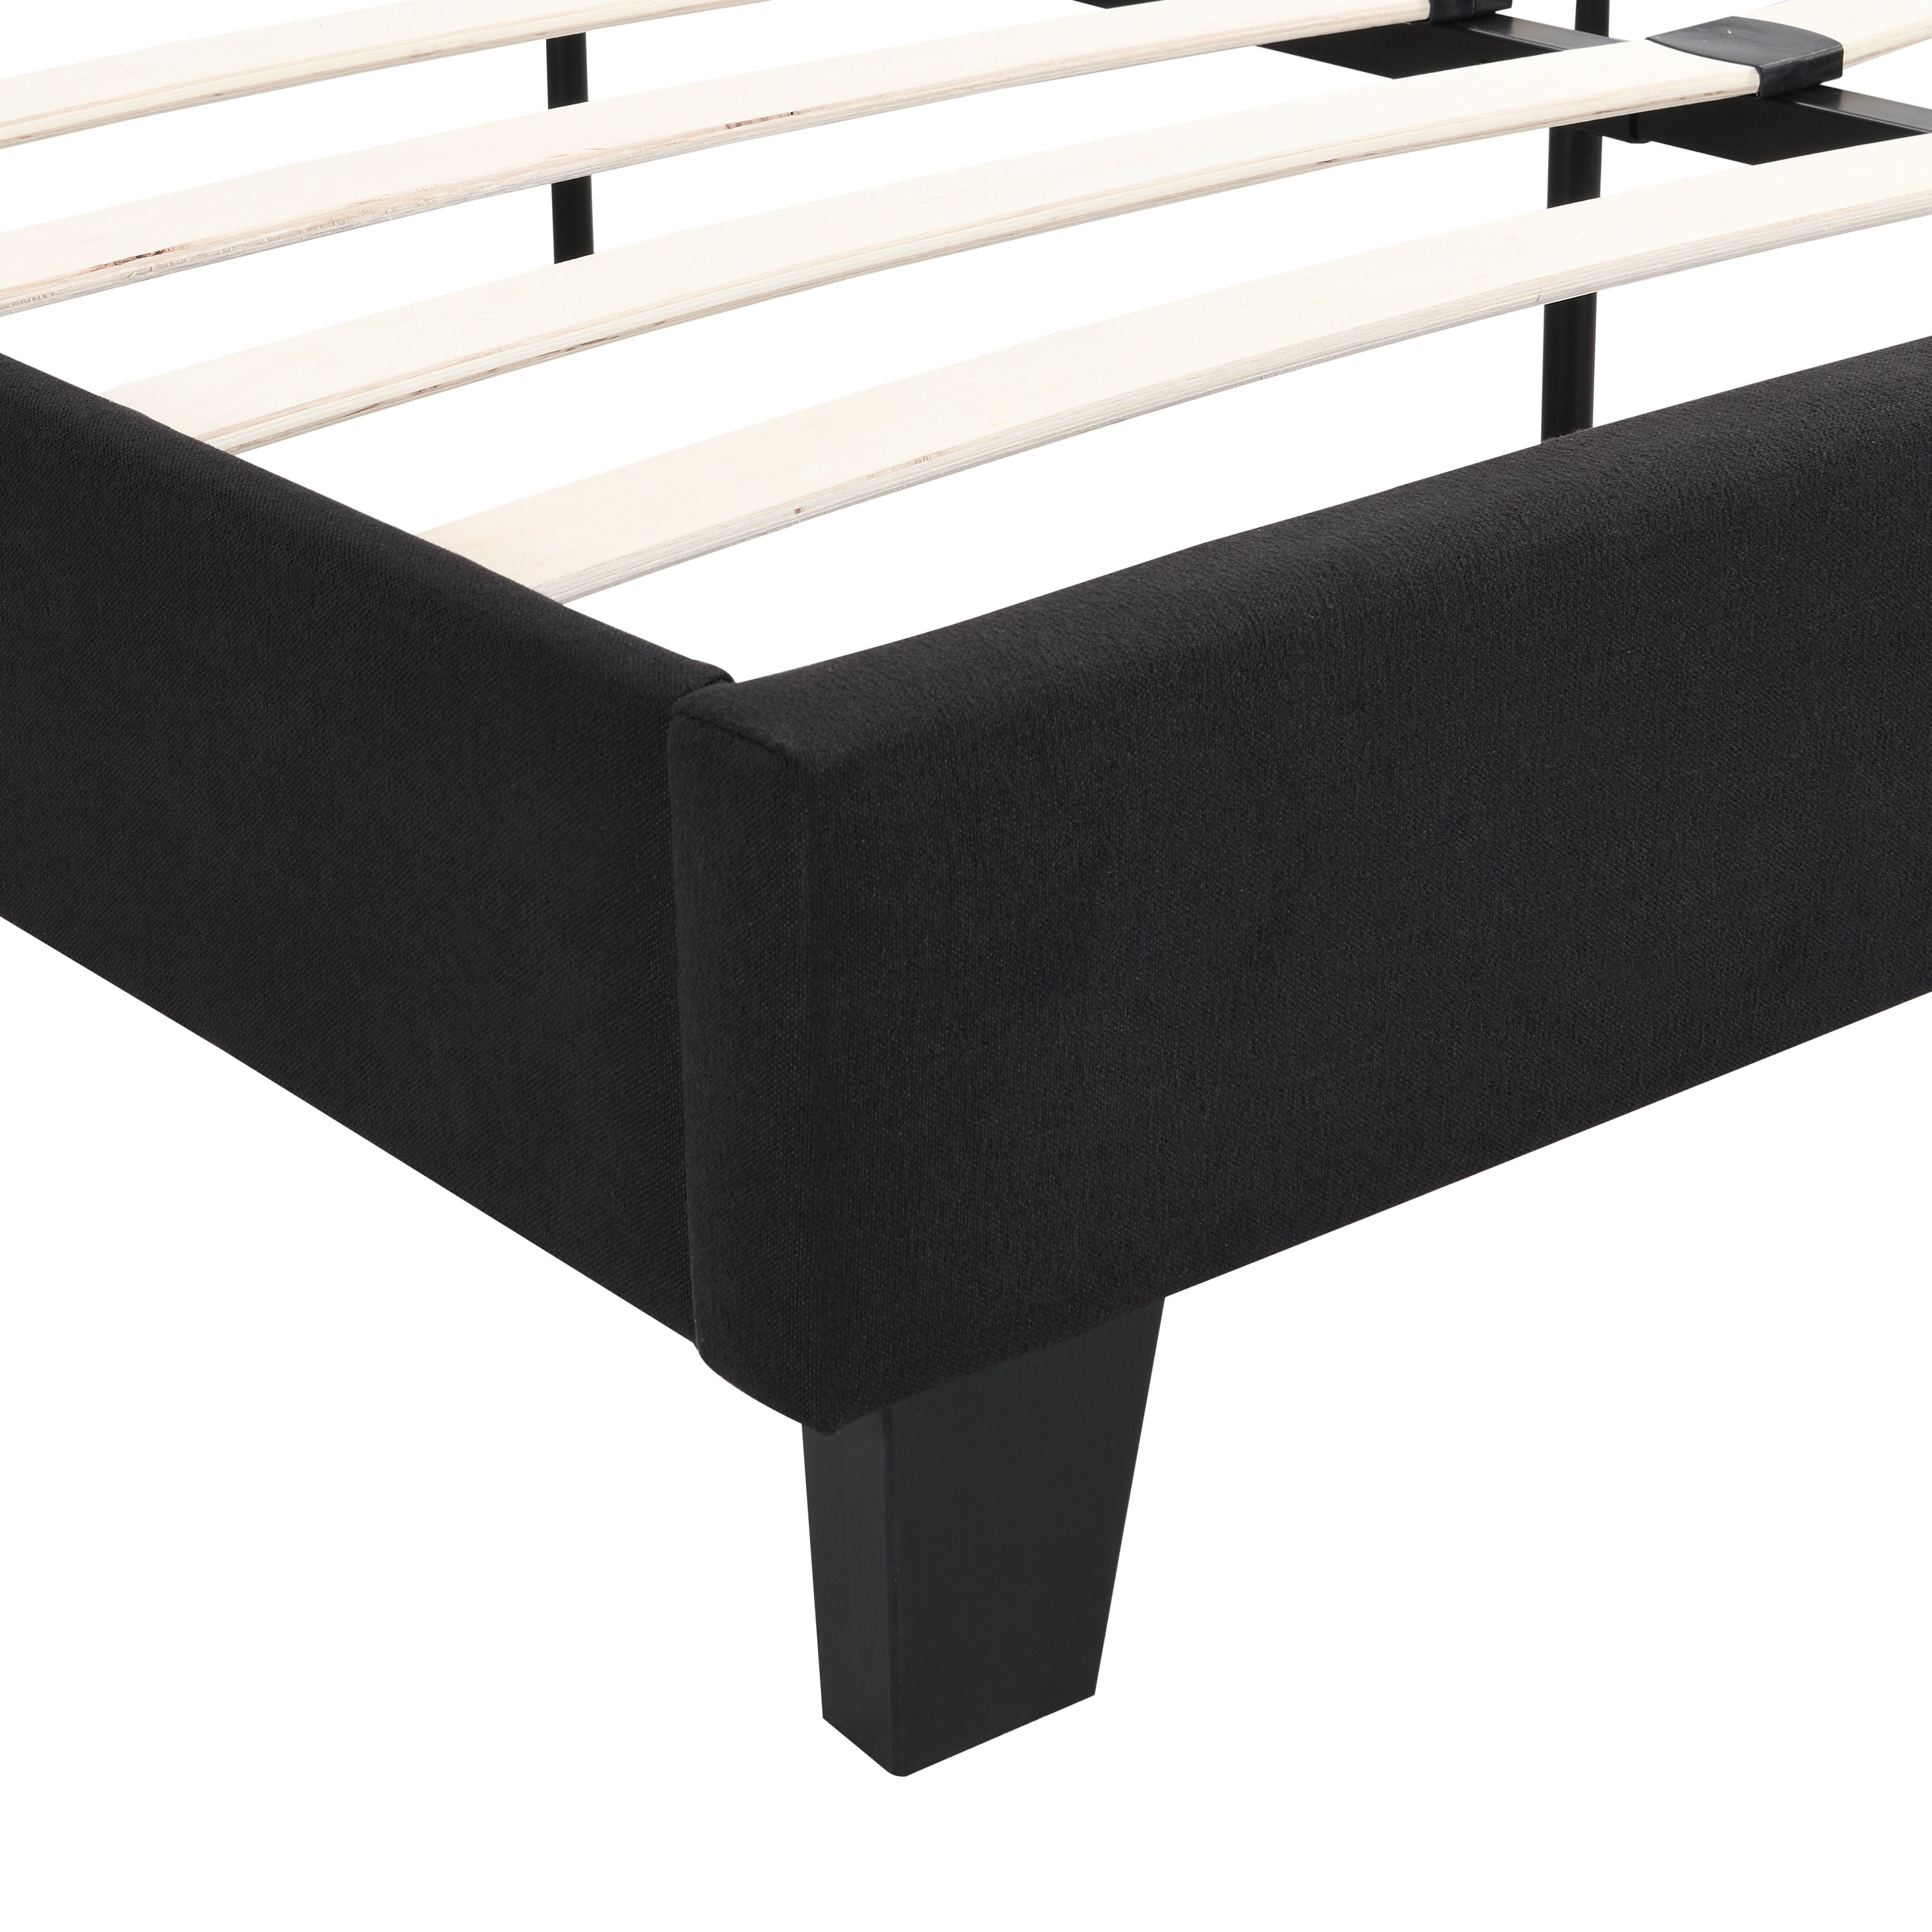 King Size Platform Bed Frame with Black Linen Fabric Headboard By: Alabama Beds